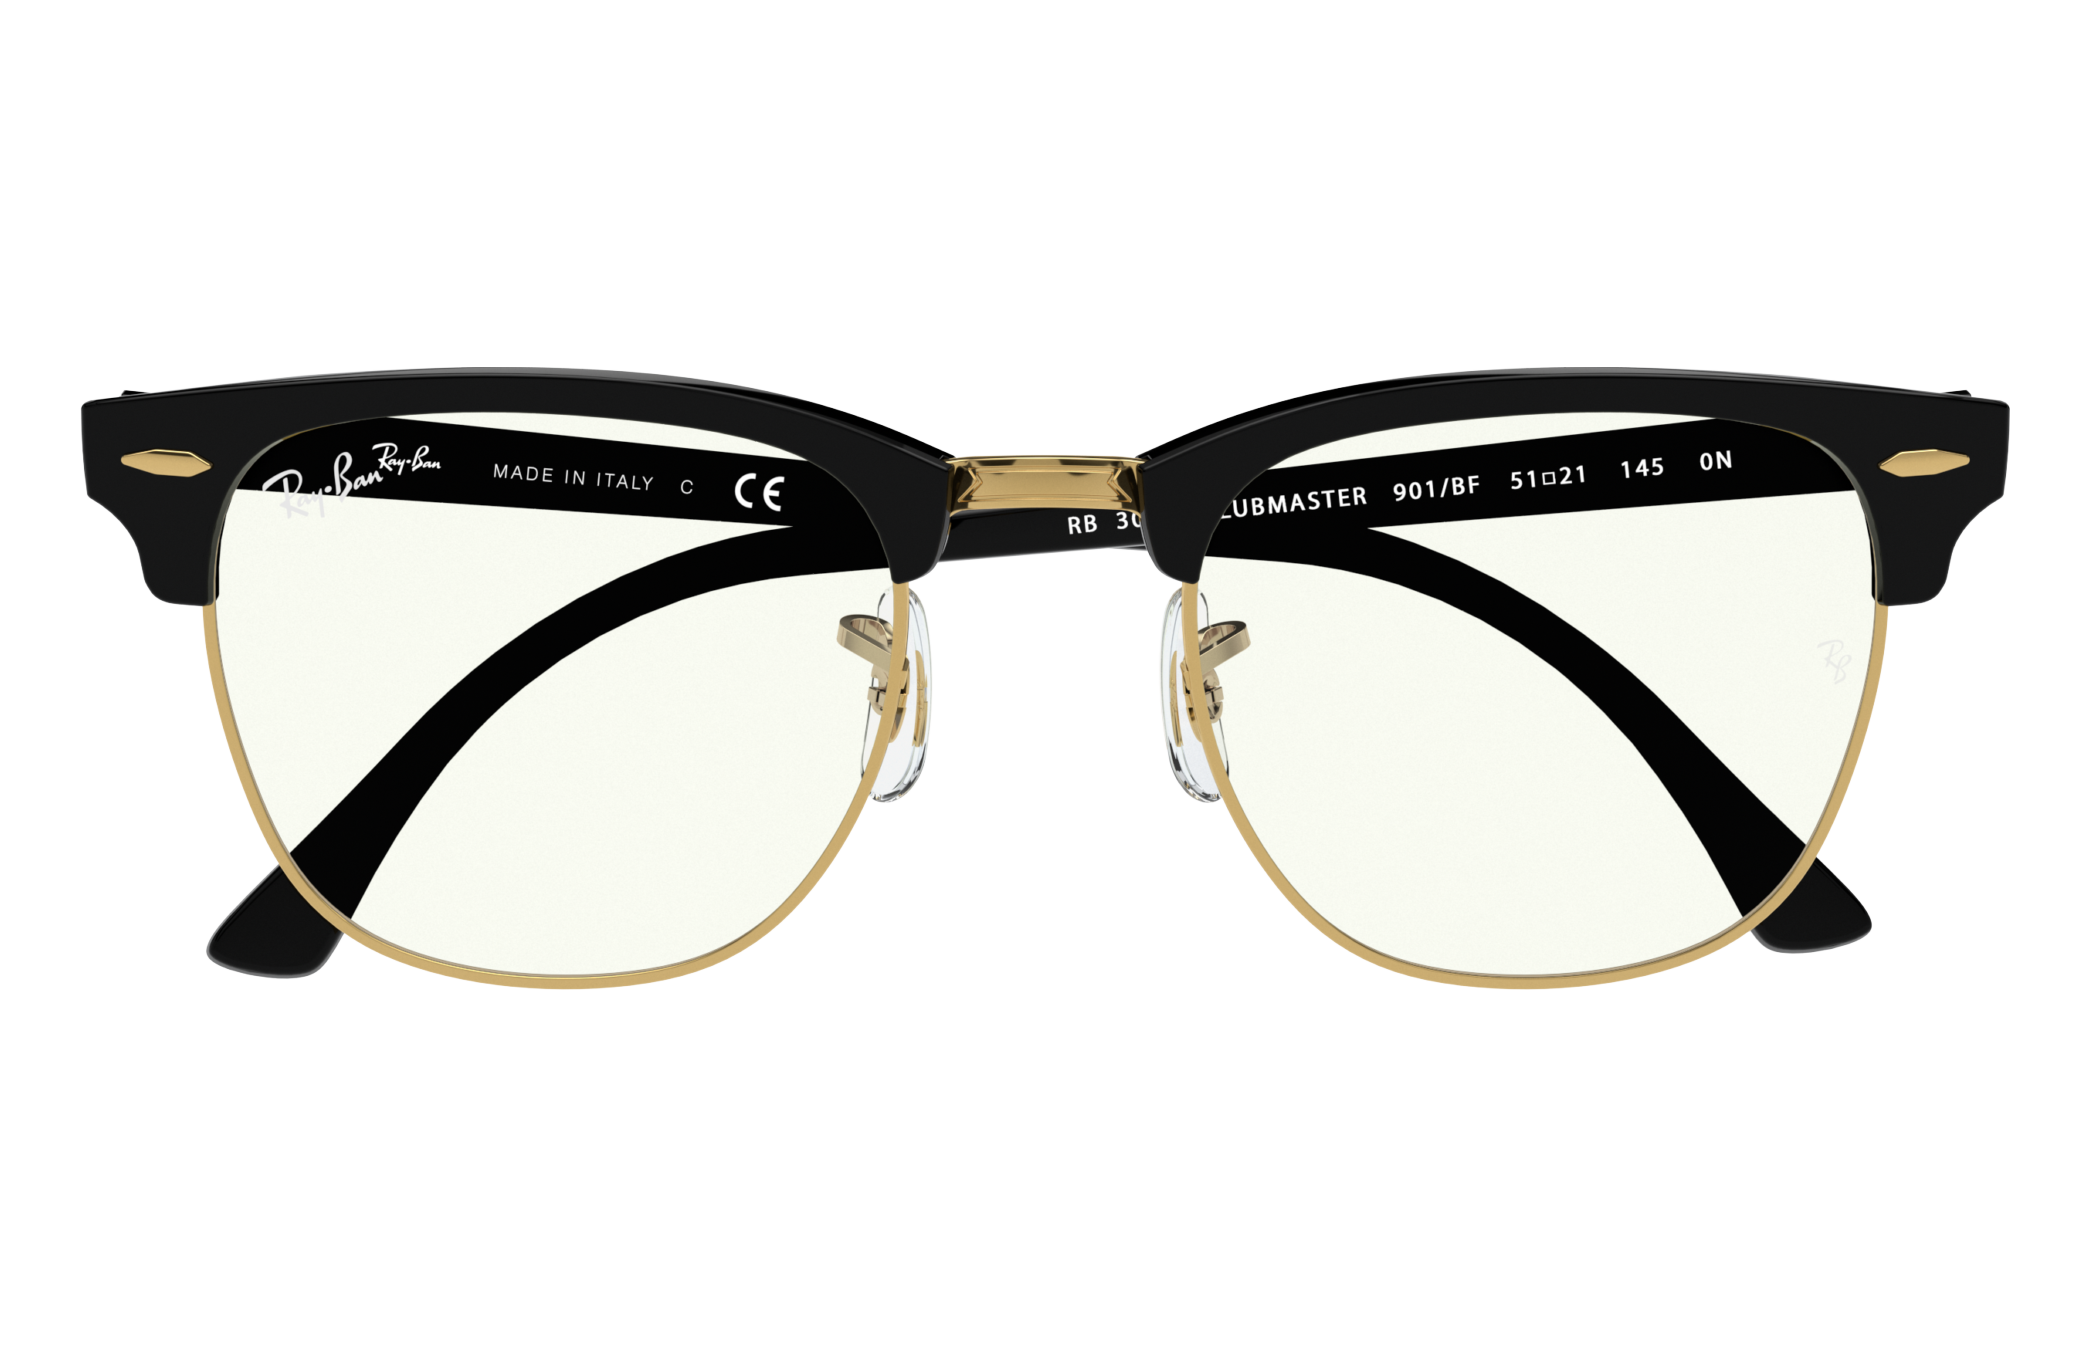 ray ban clubmaster light